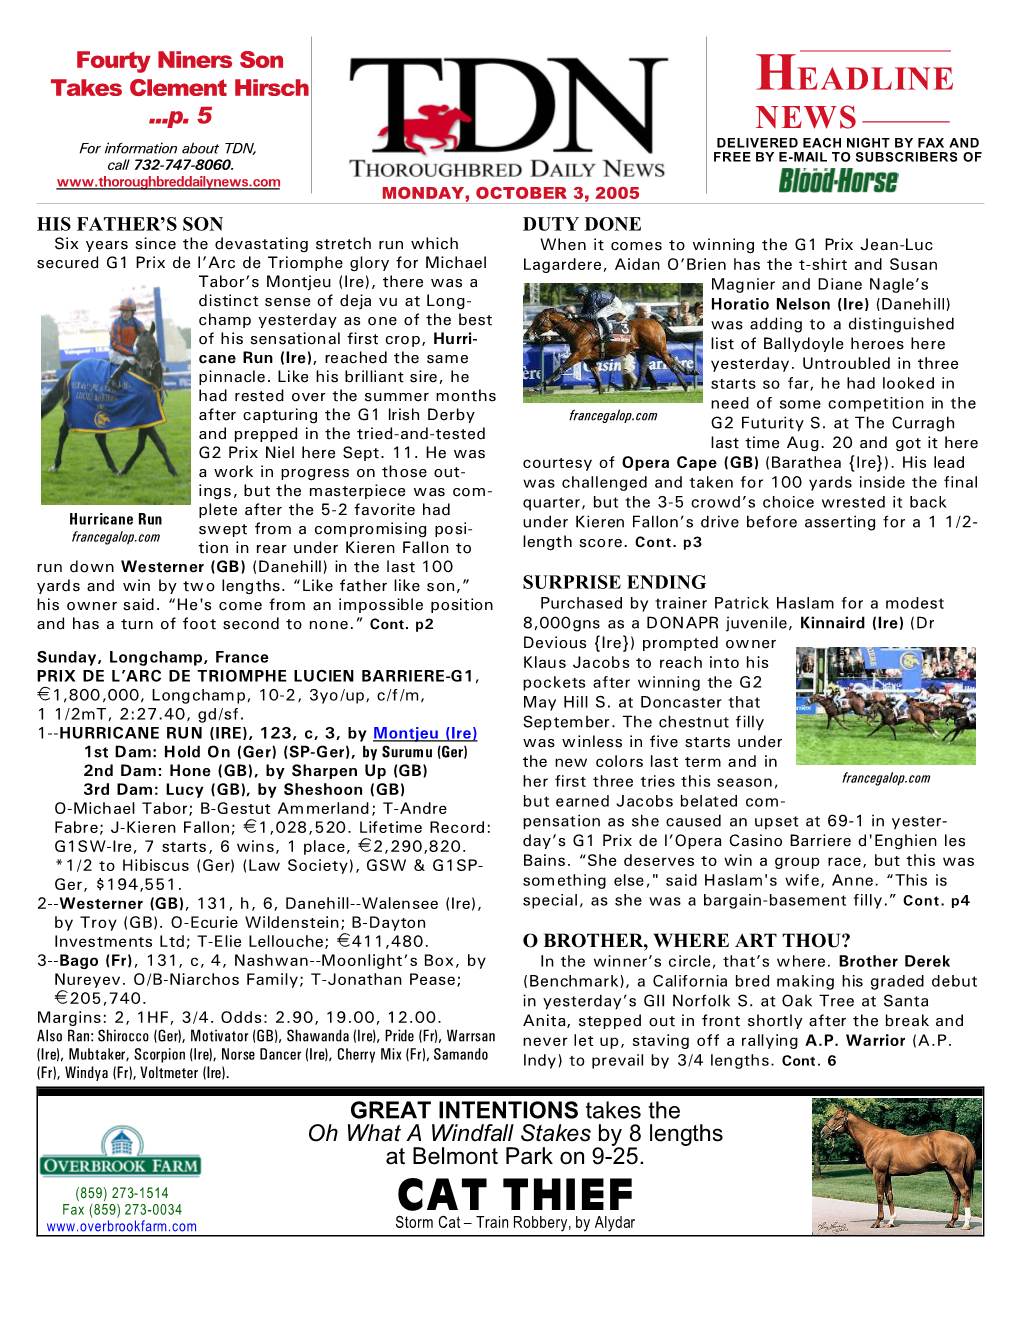 CAT THIEF Storm Cat – Train Robbery, by Alydar TDN P HEADLINE NEWS • 10/3/05 • PAGE 2 of 11